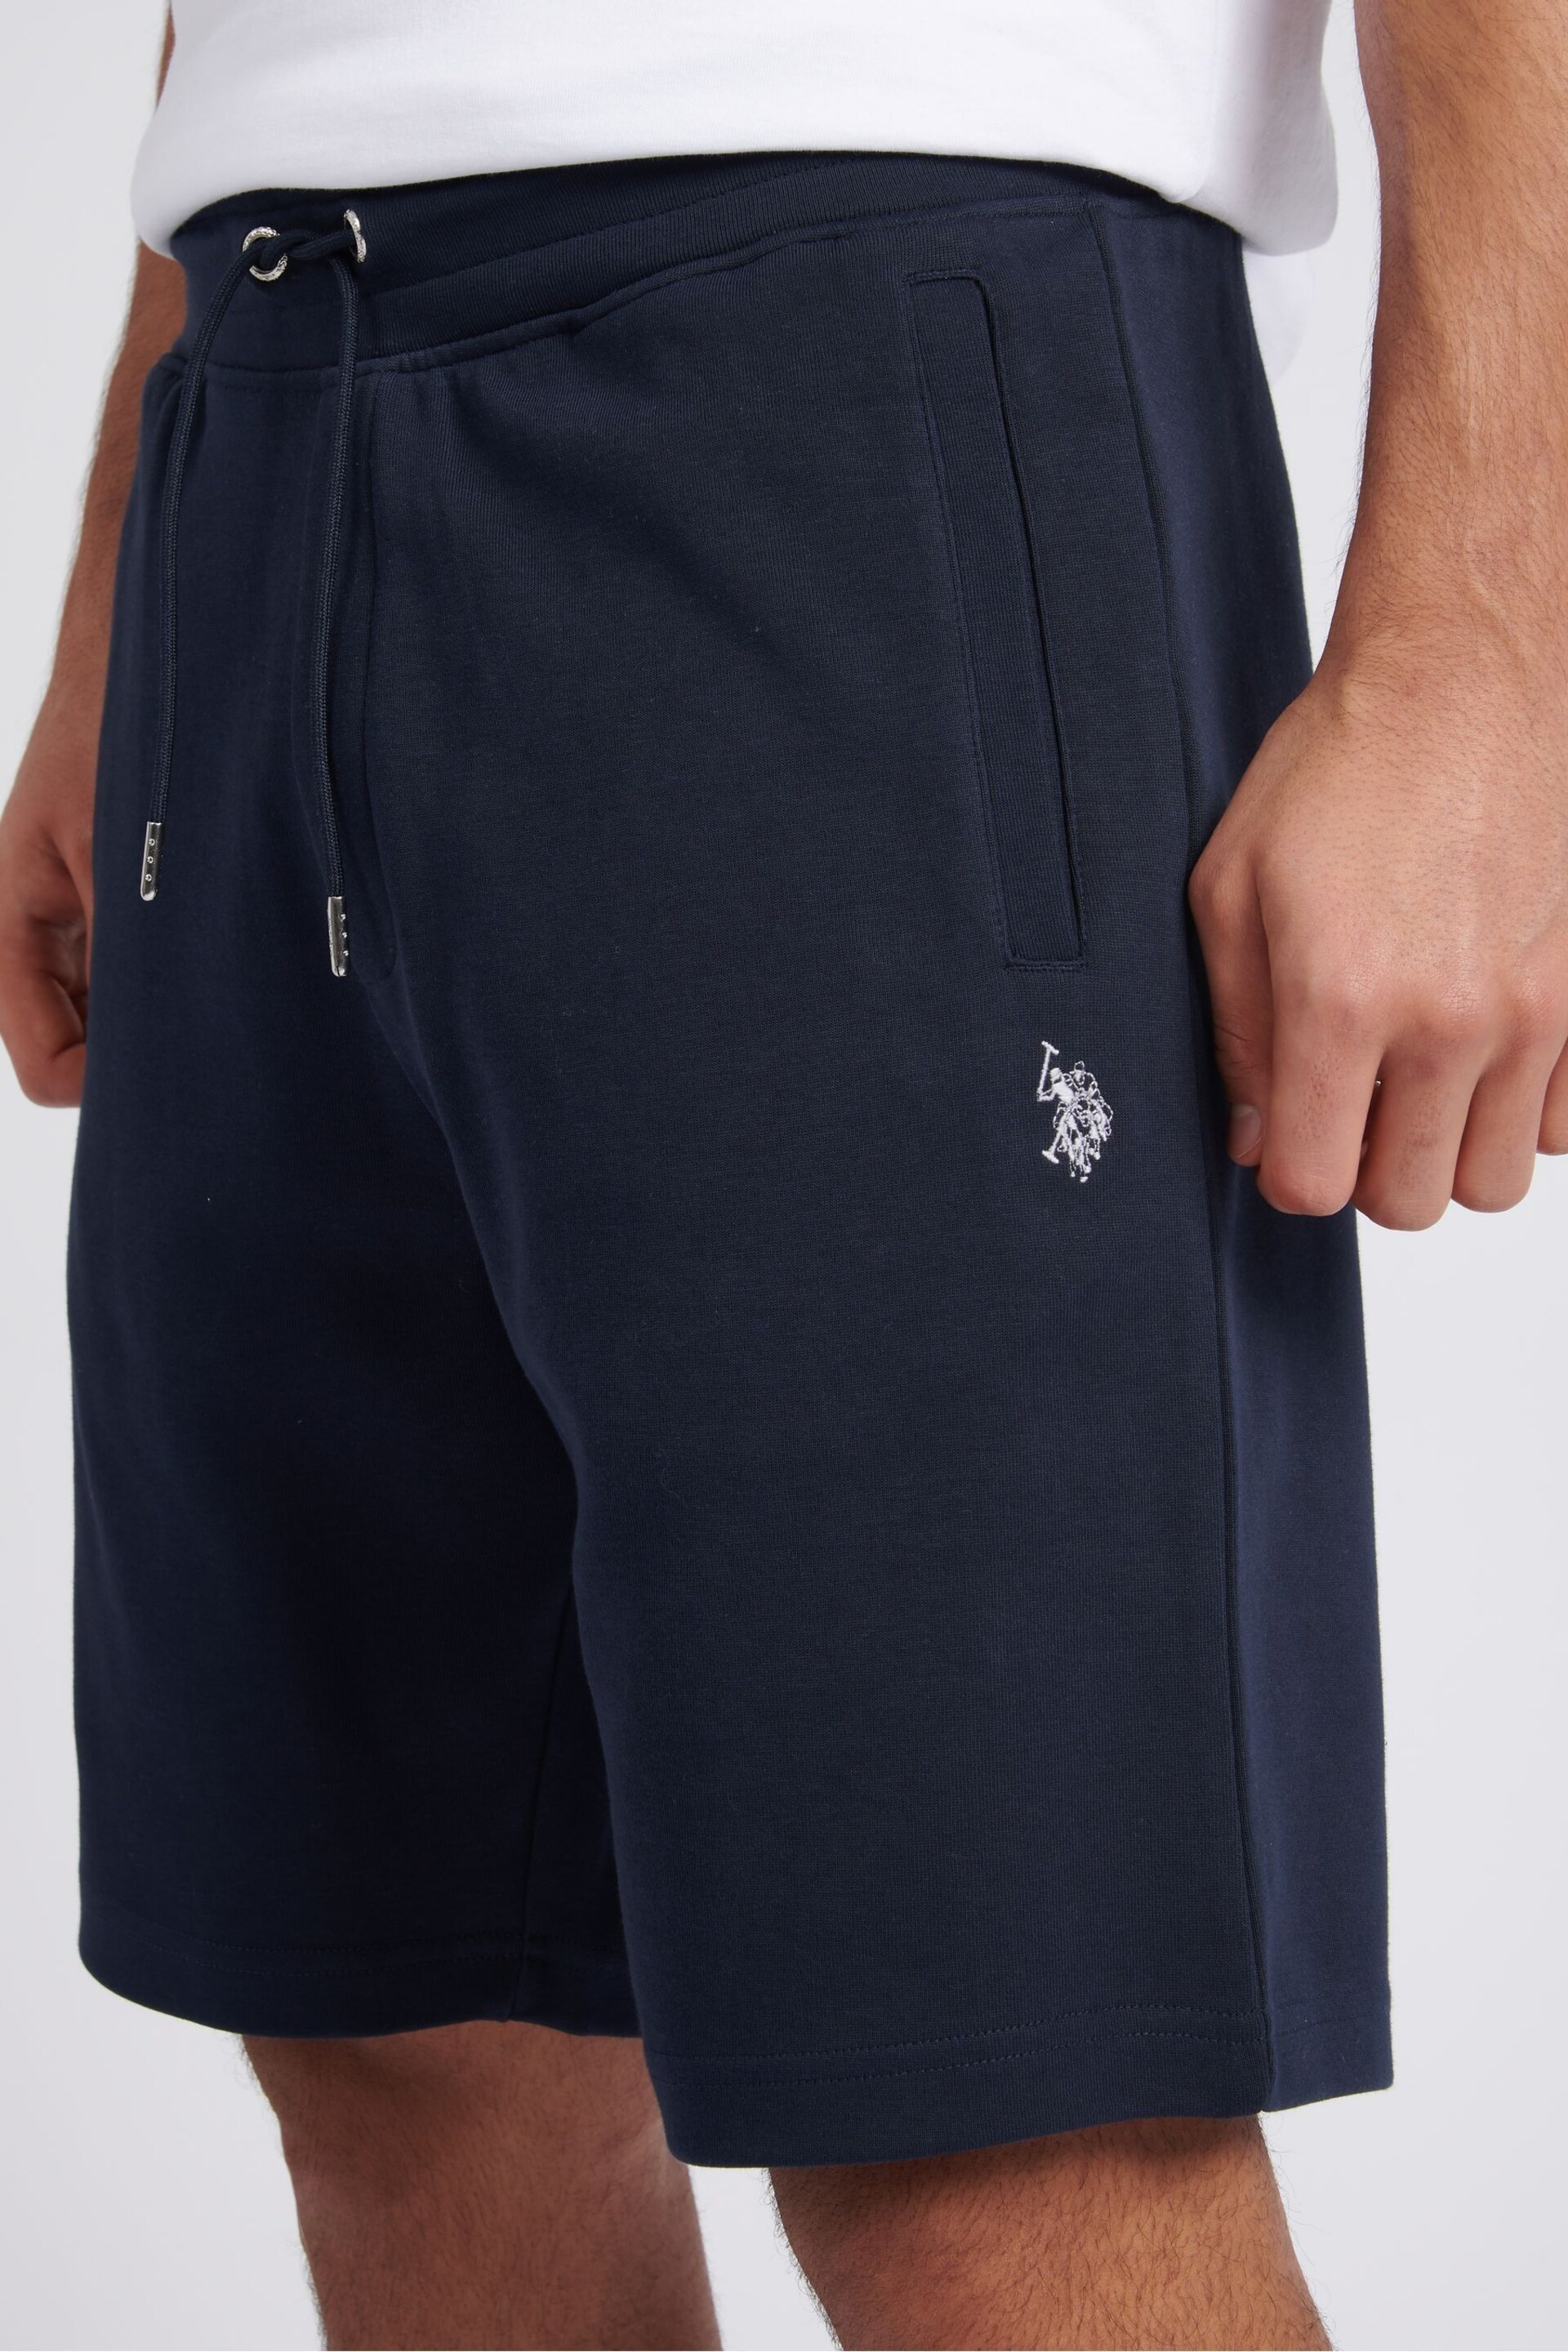 U.S. Polo Assn. Mens Classic Fit Blue Luxe Sweat Shorts - Image 2 of 7